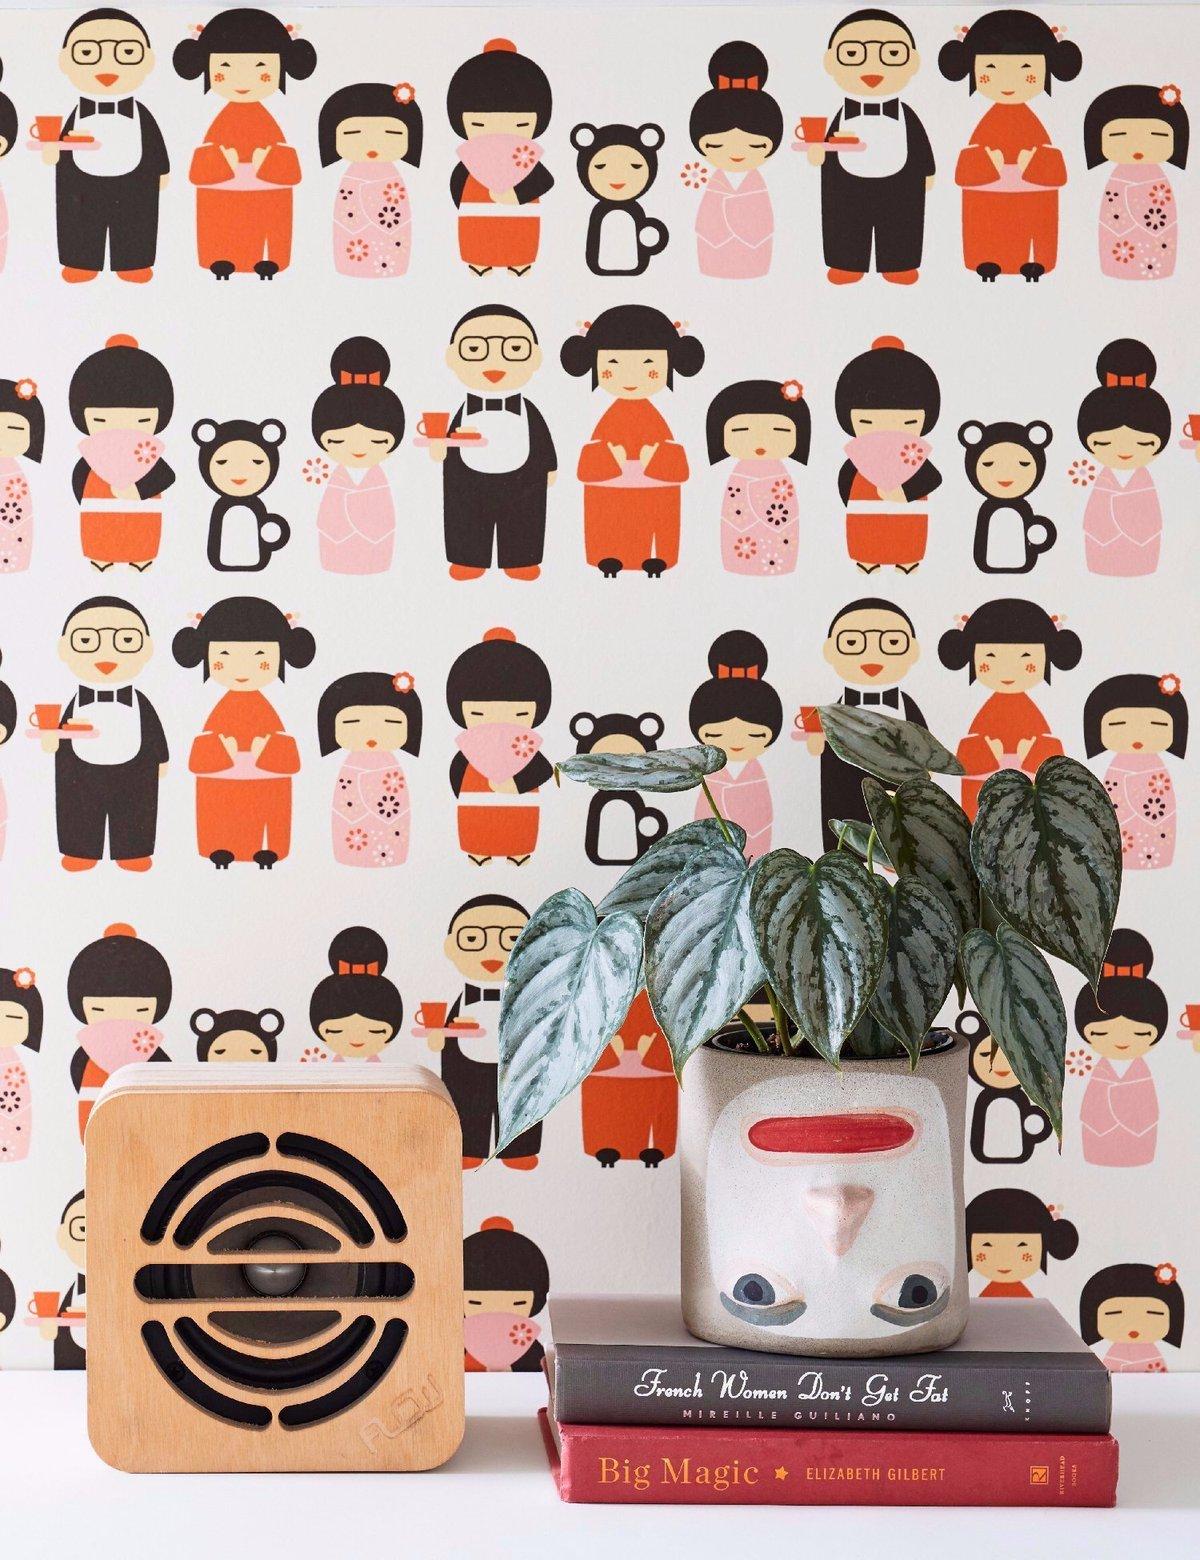 This adorable kokeshi Japanese doll pattern is the perfect wallpaper for your child's room! 

Samples are available for $18 including US shipping, please message us to purchase.  

Printing: Digital pigment print (minimum order of 4